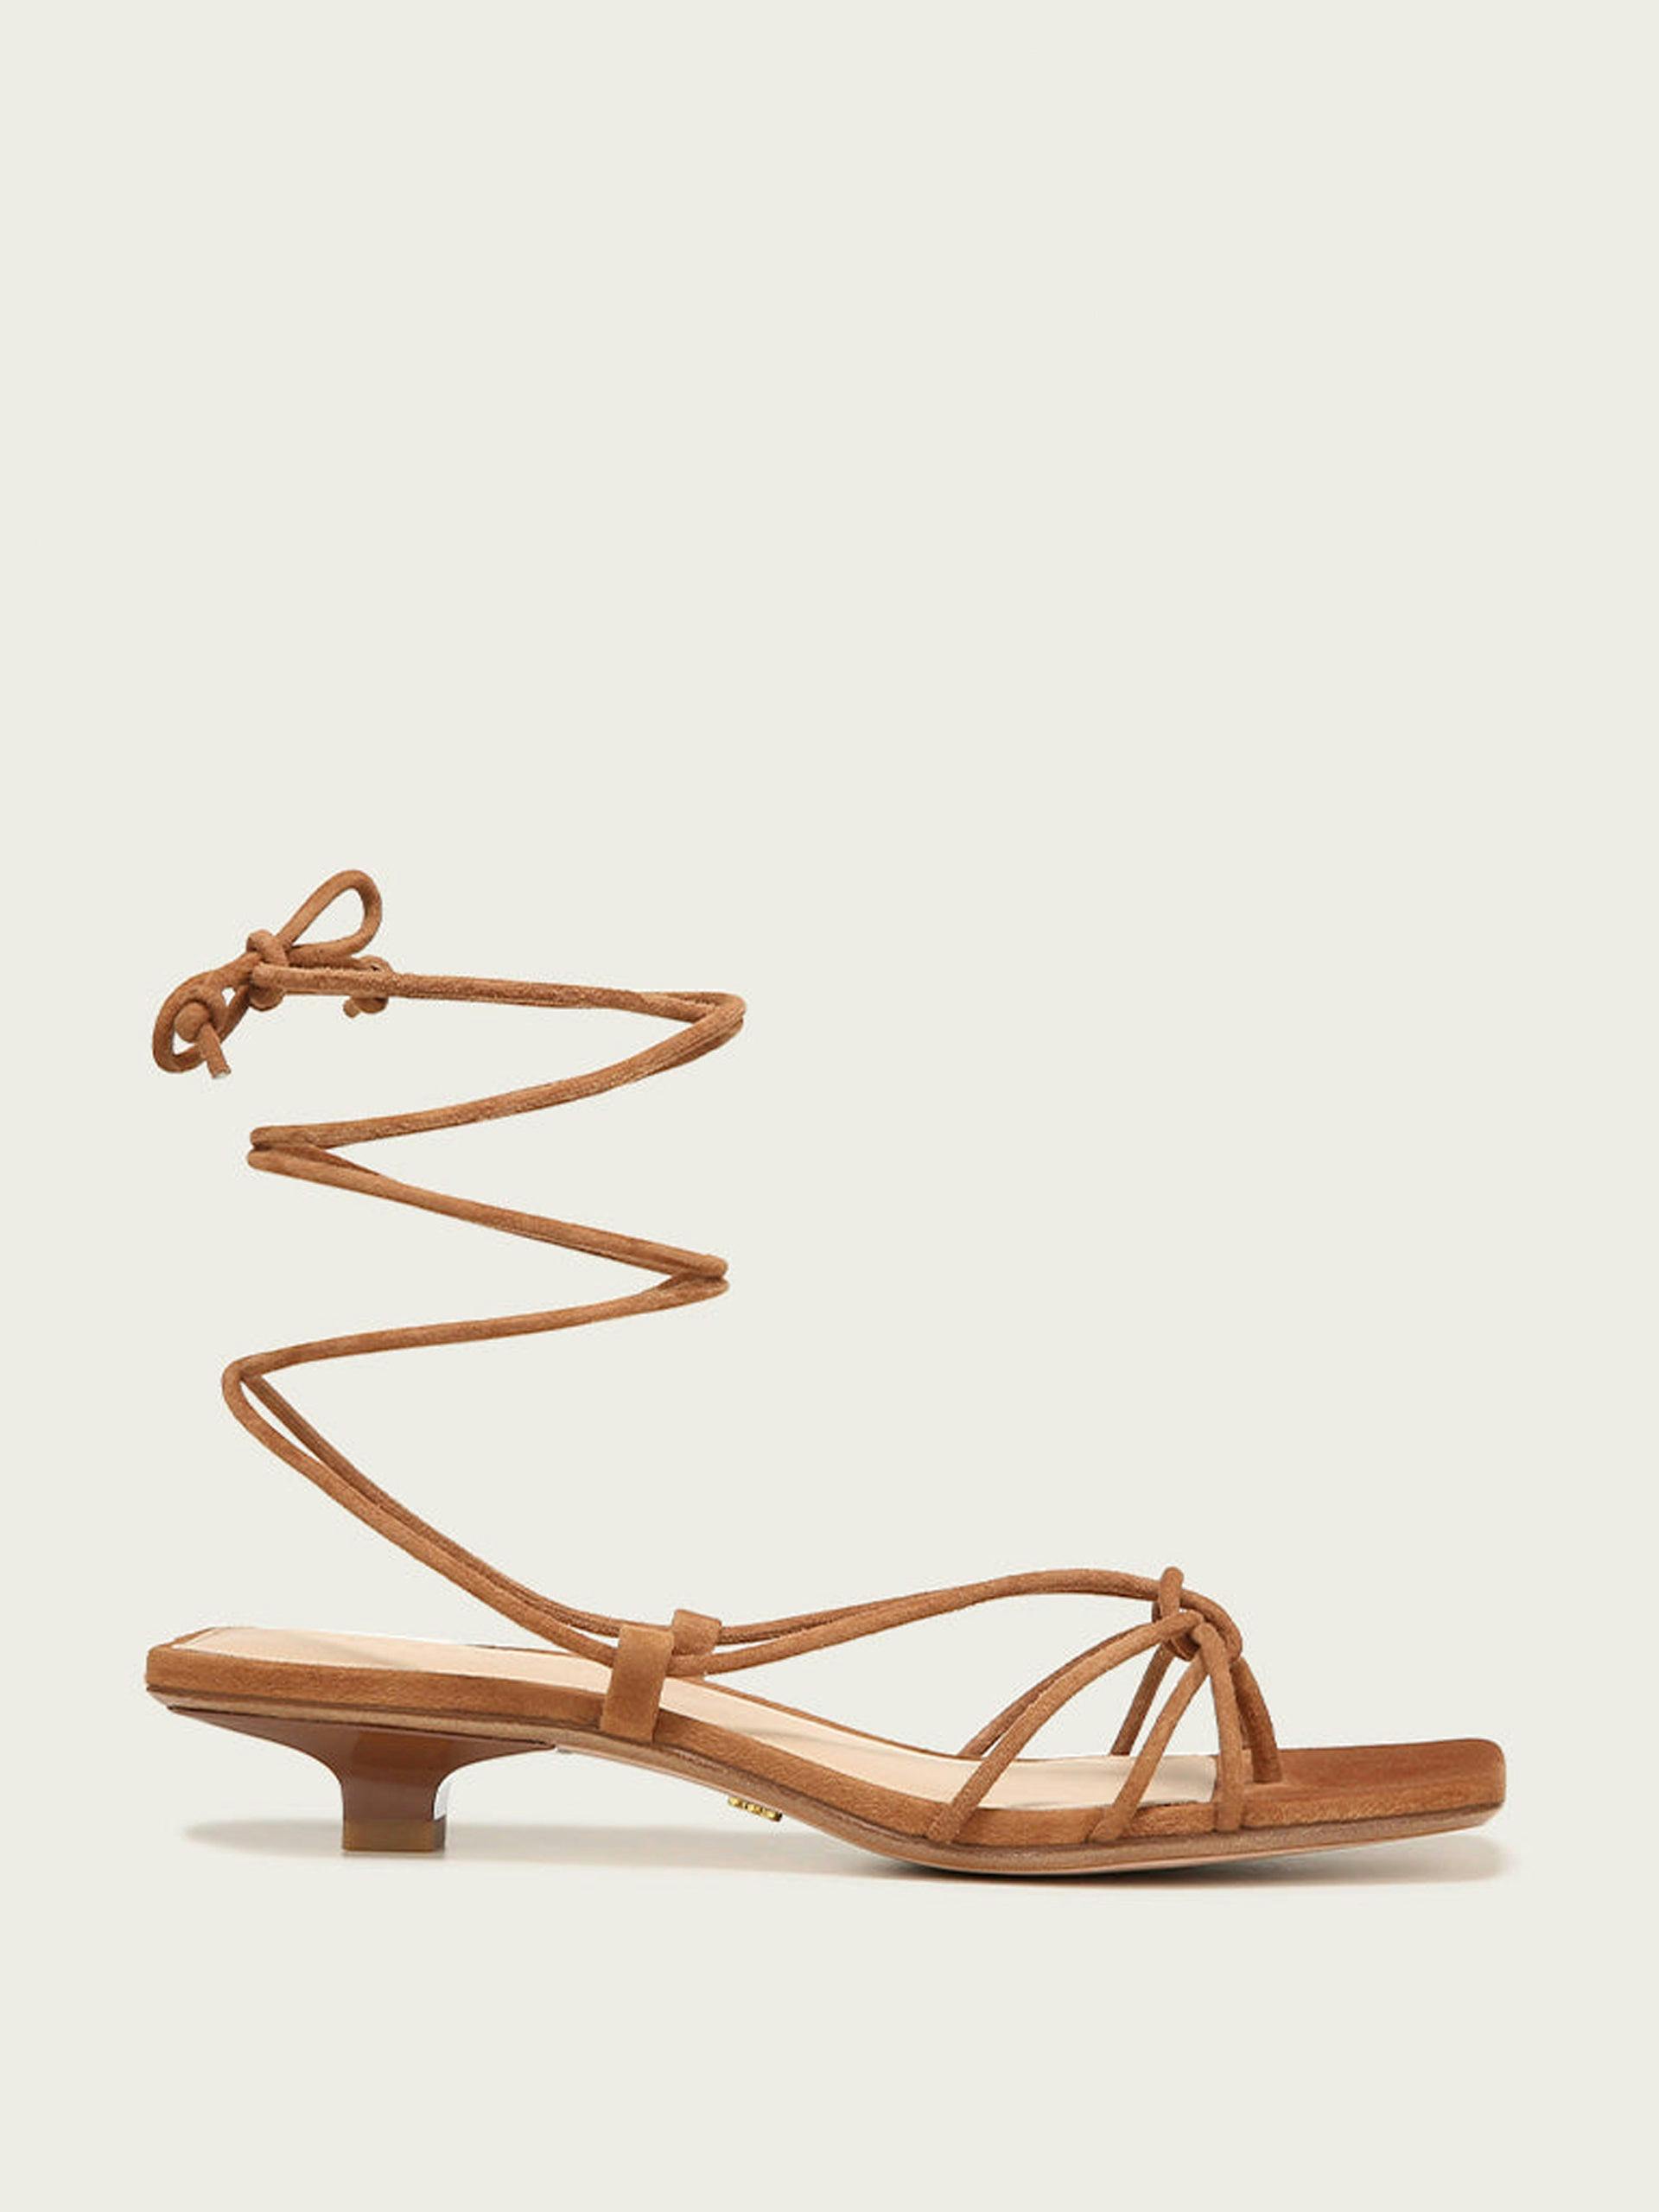 Brown suede lace up sandals